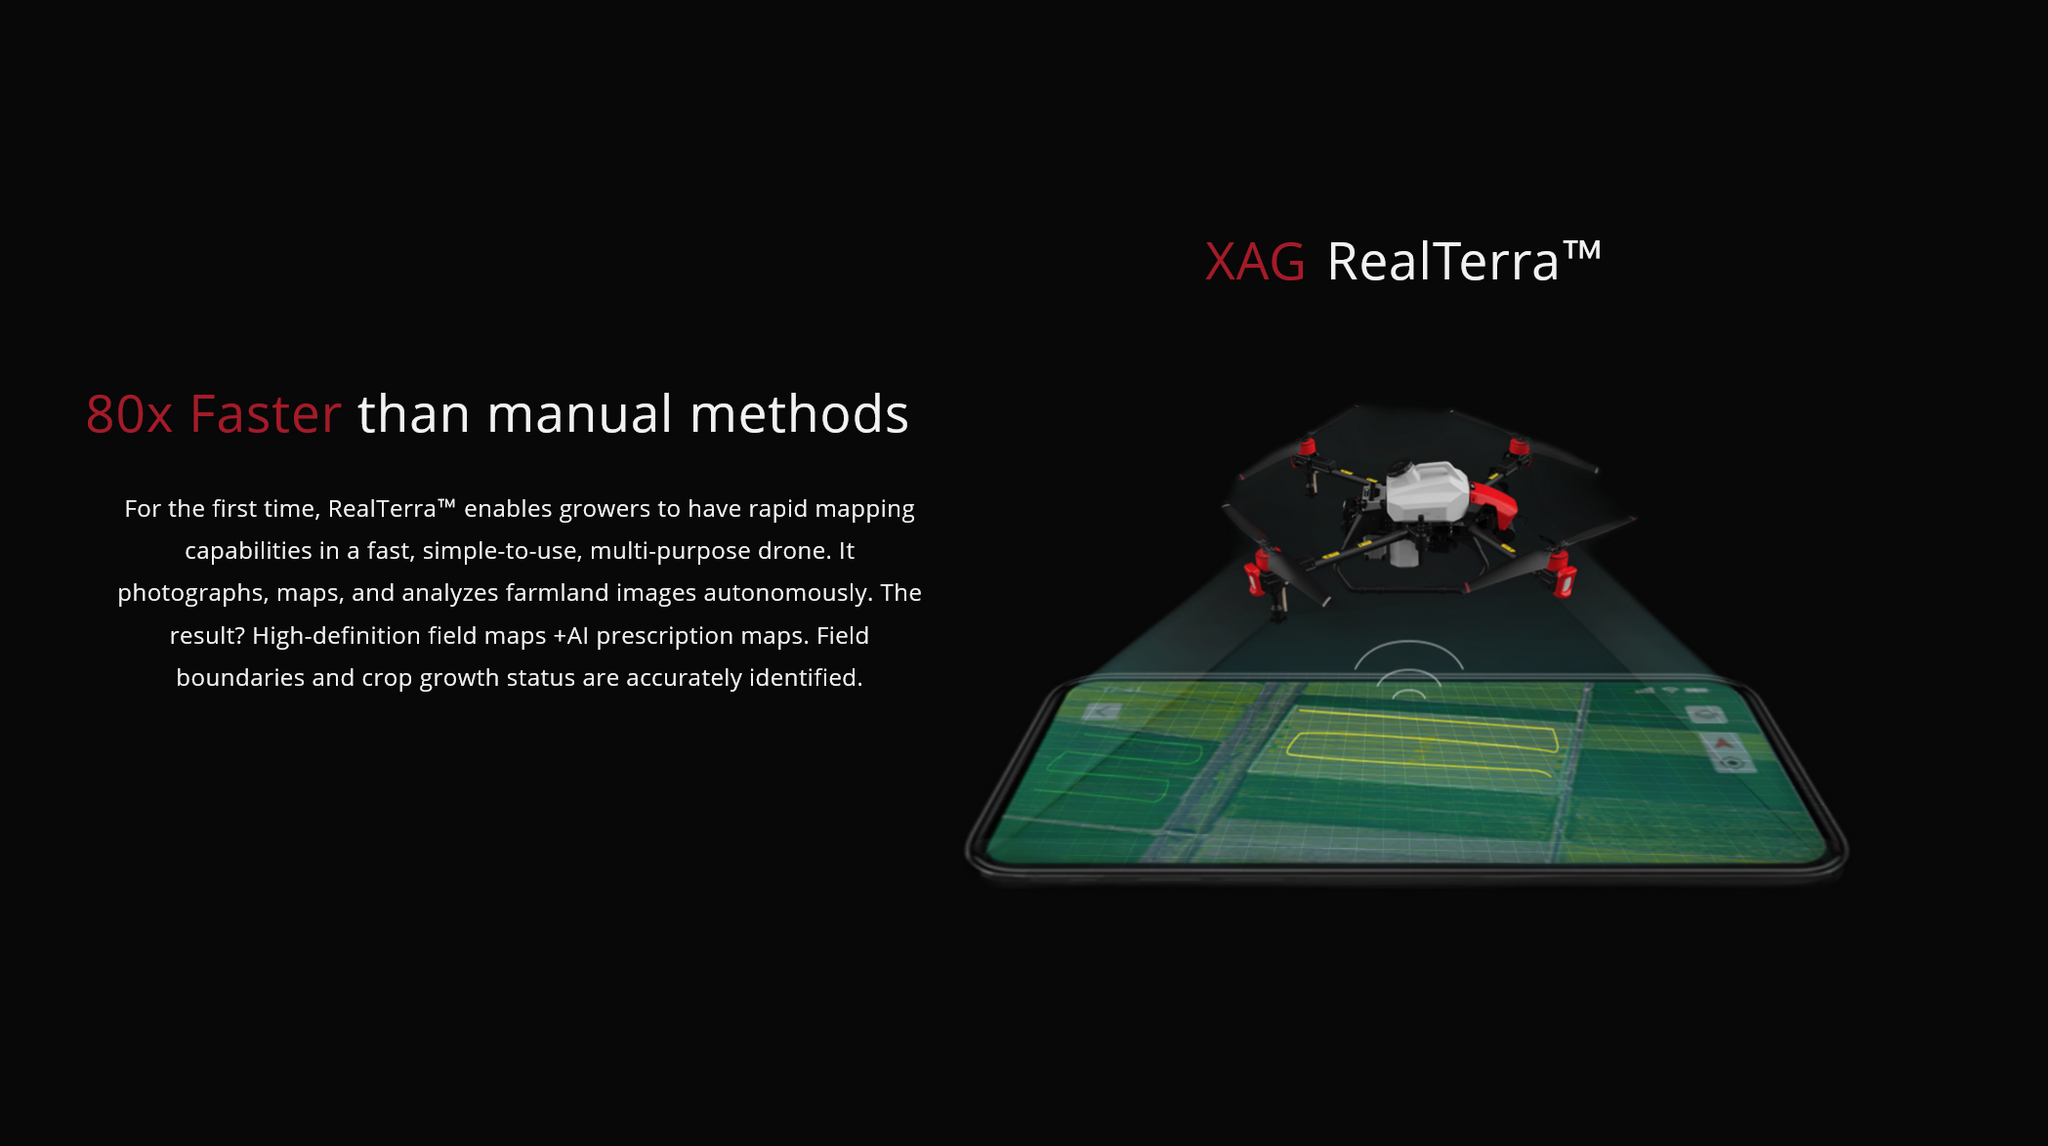 XAG P40 20L Agriculture Drone, XAG RealTerra" enables growers to have rapid mapping capabilities in a